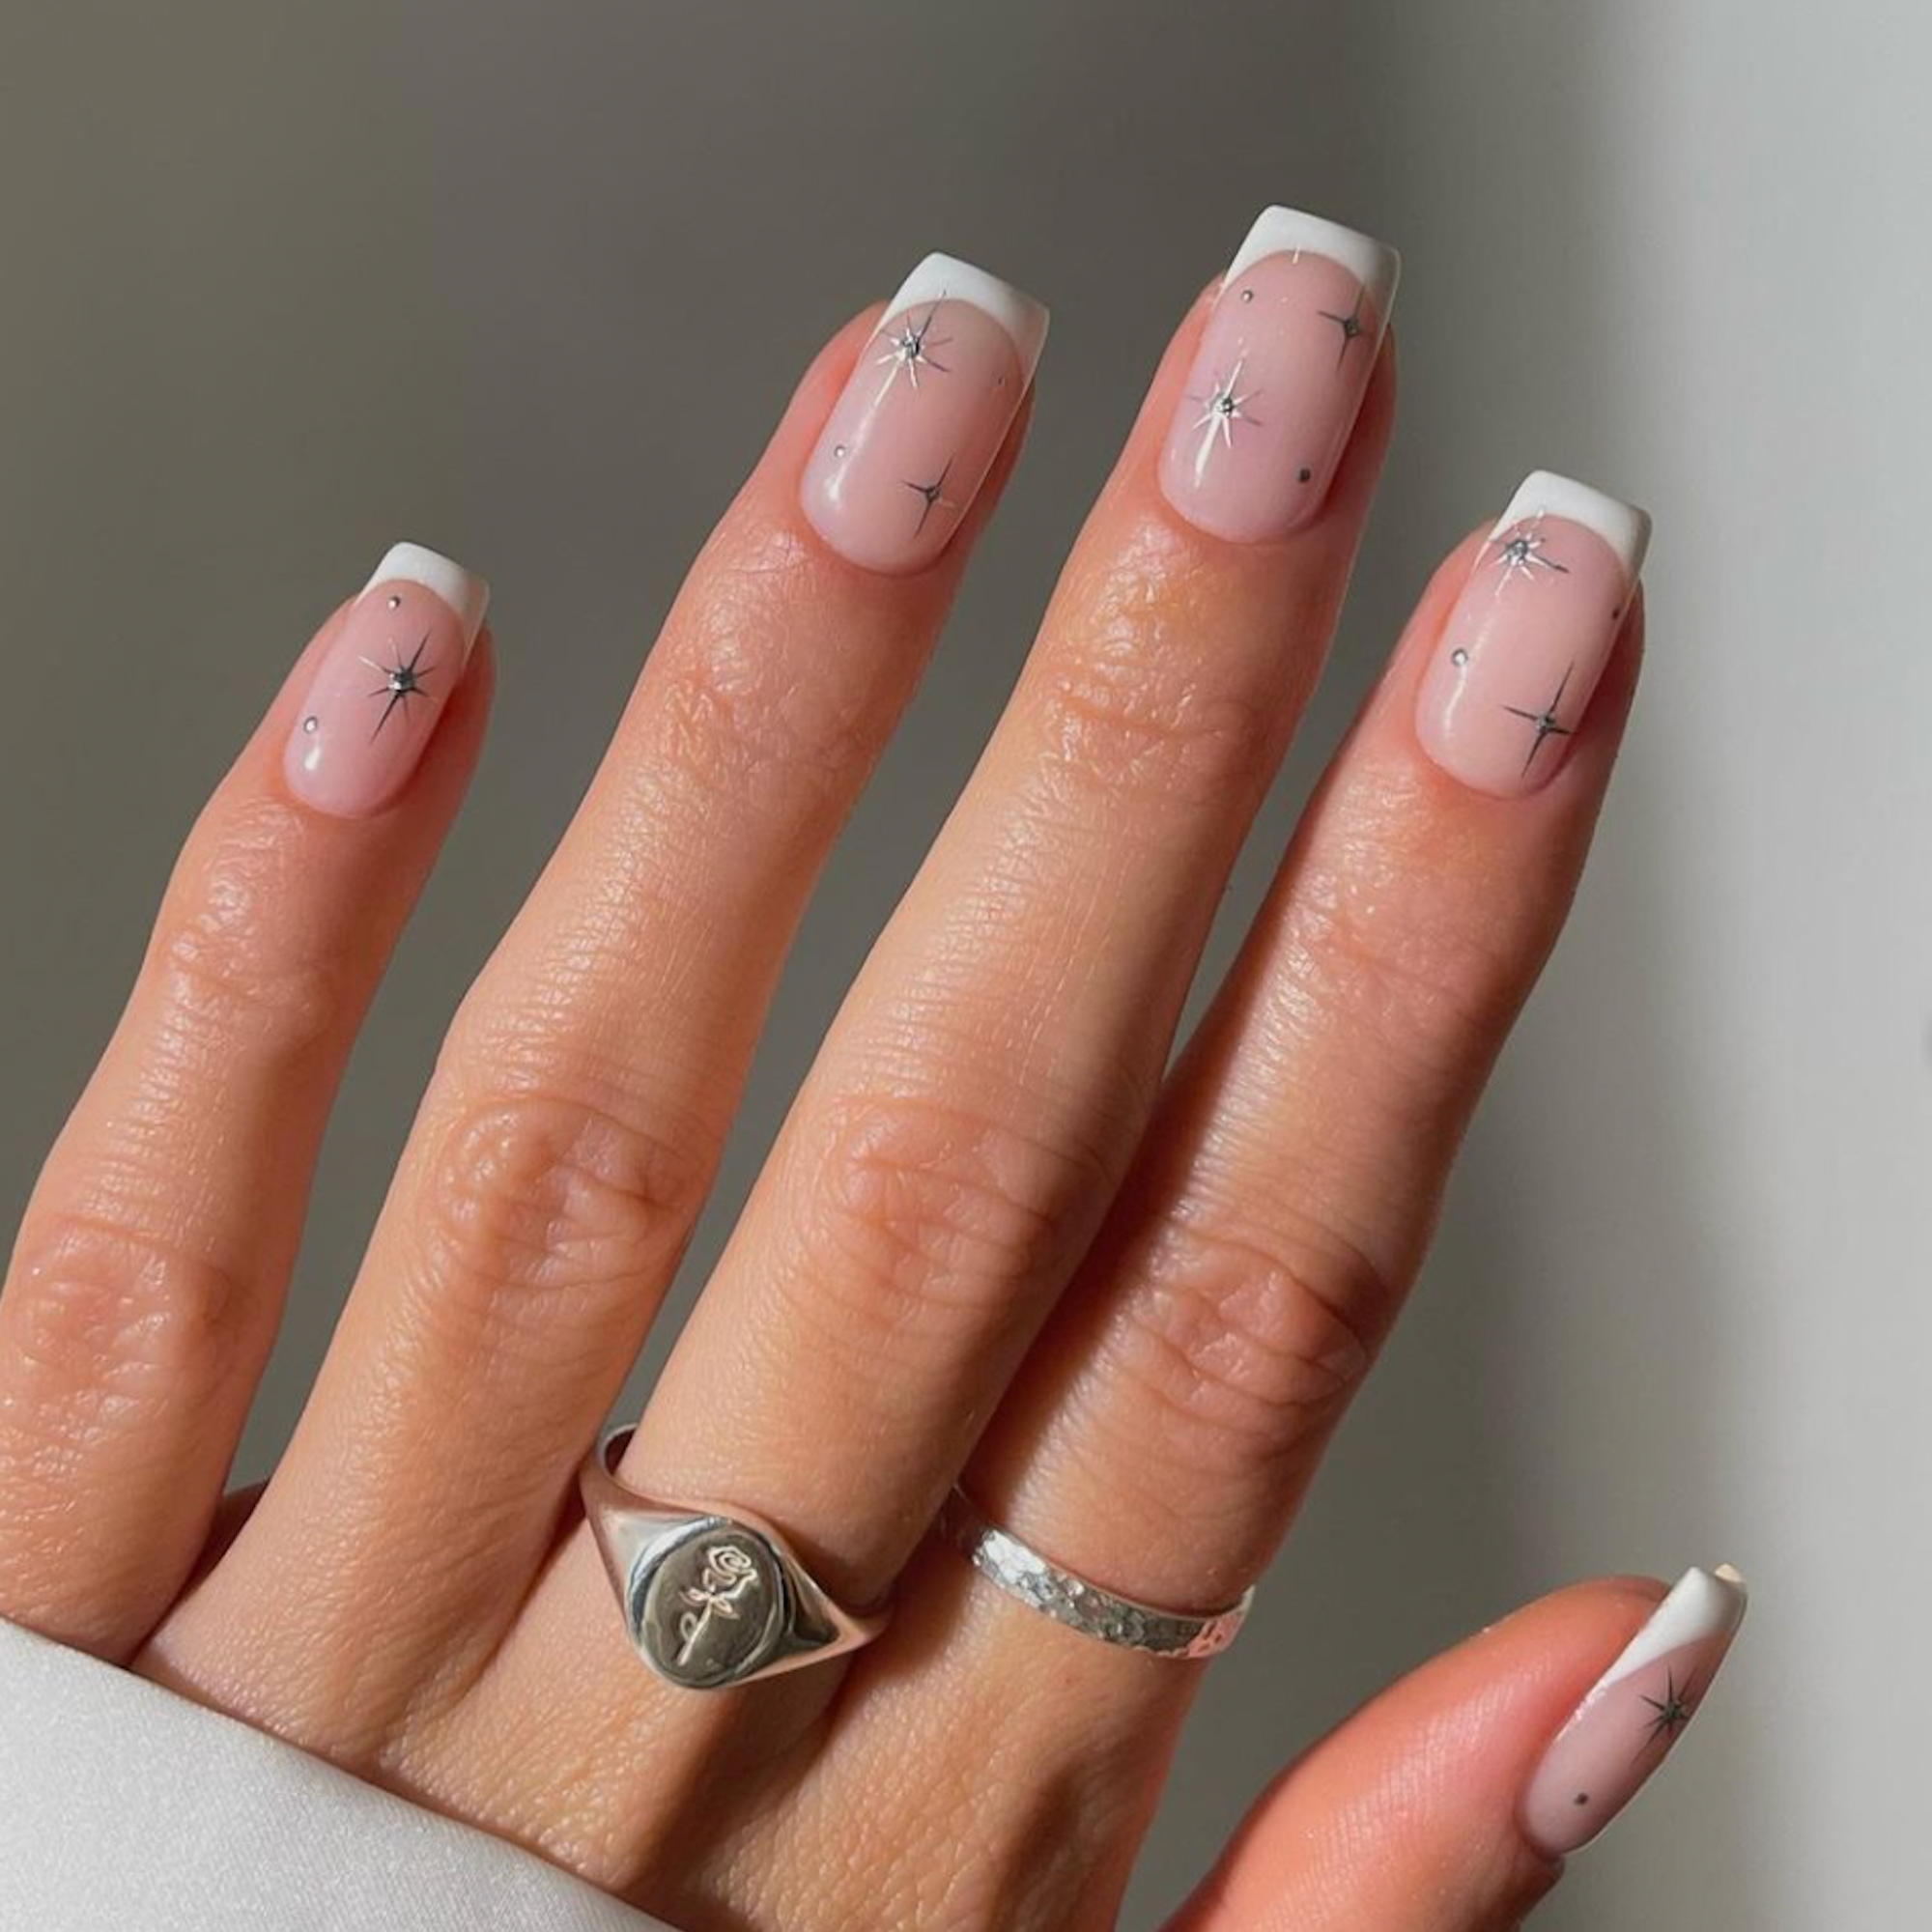 16 Cute And Festive Christmas Nail Designs To Try Out - The Summer Study